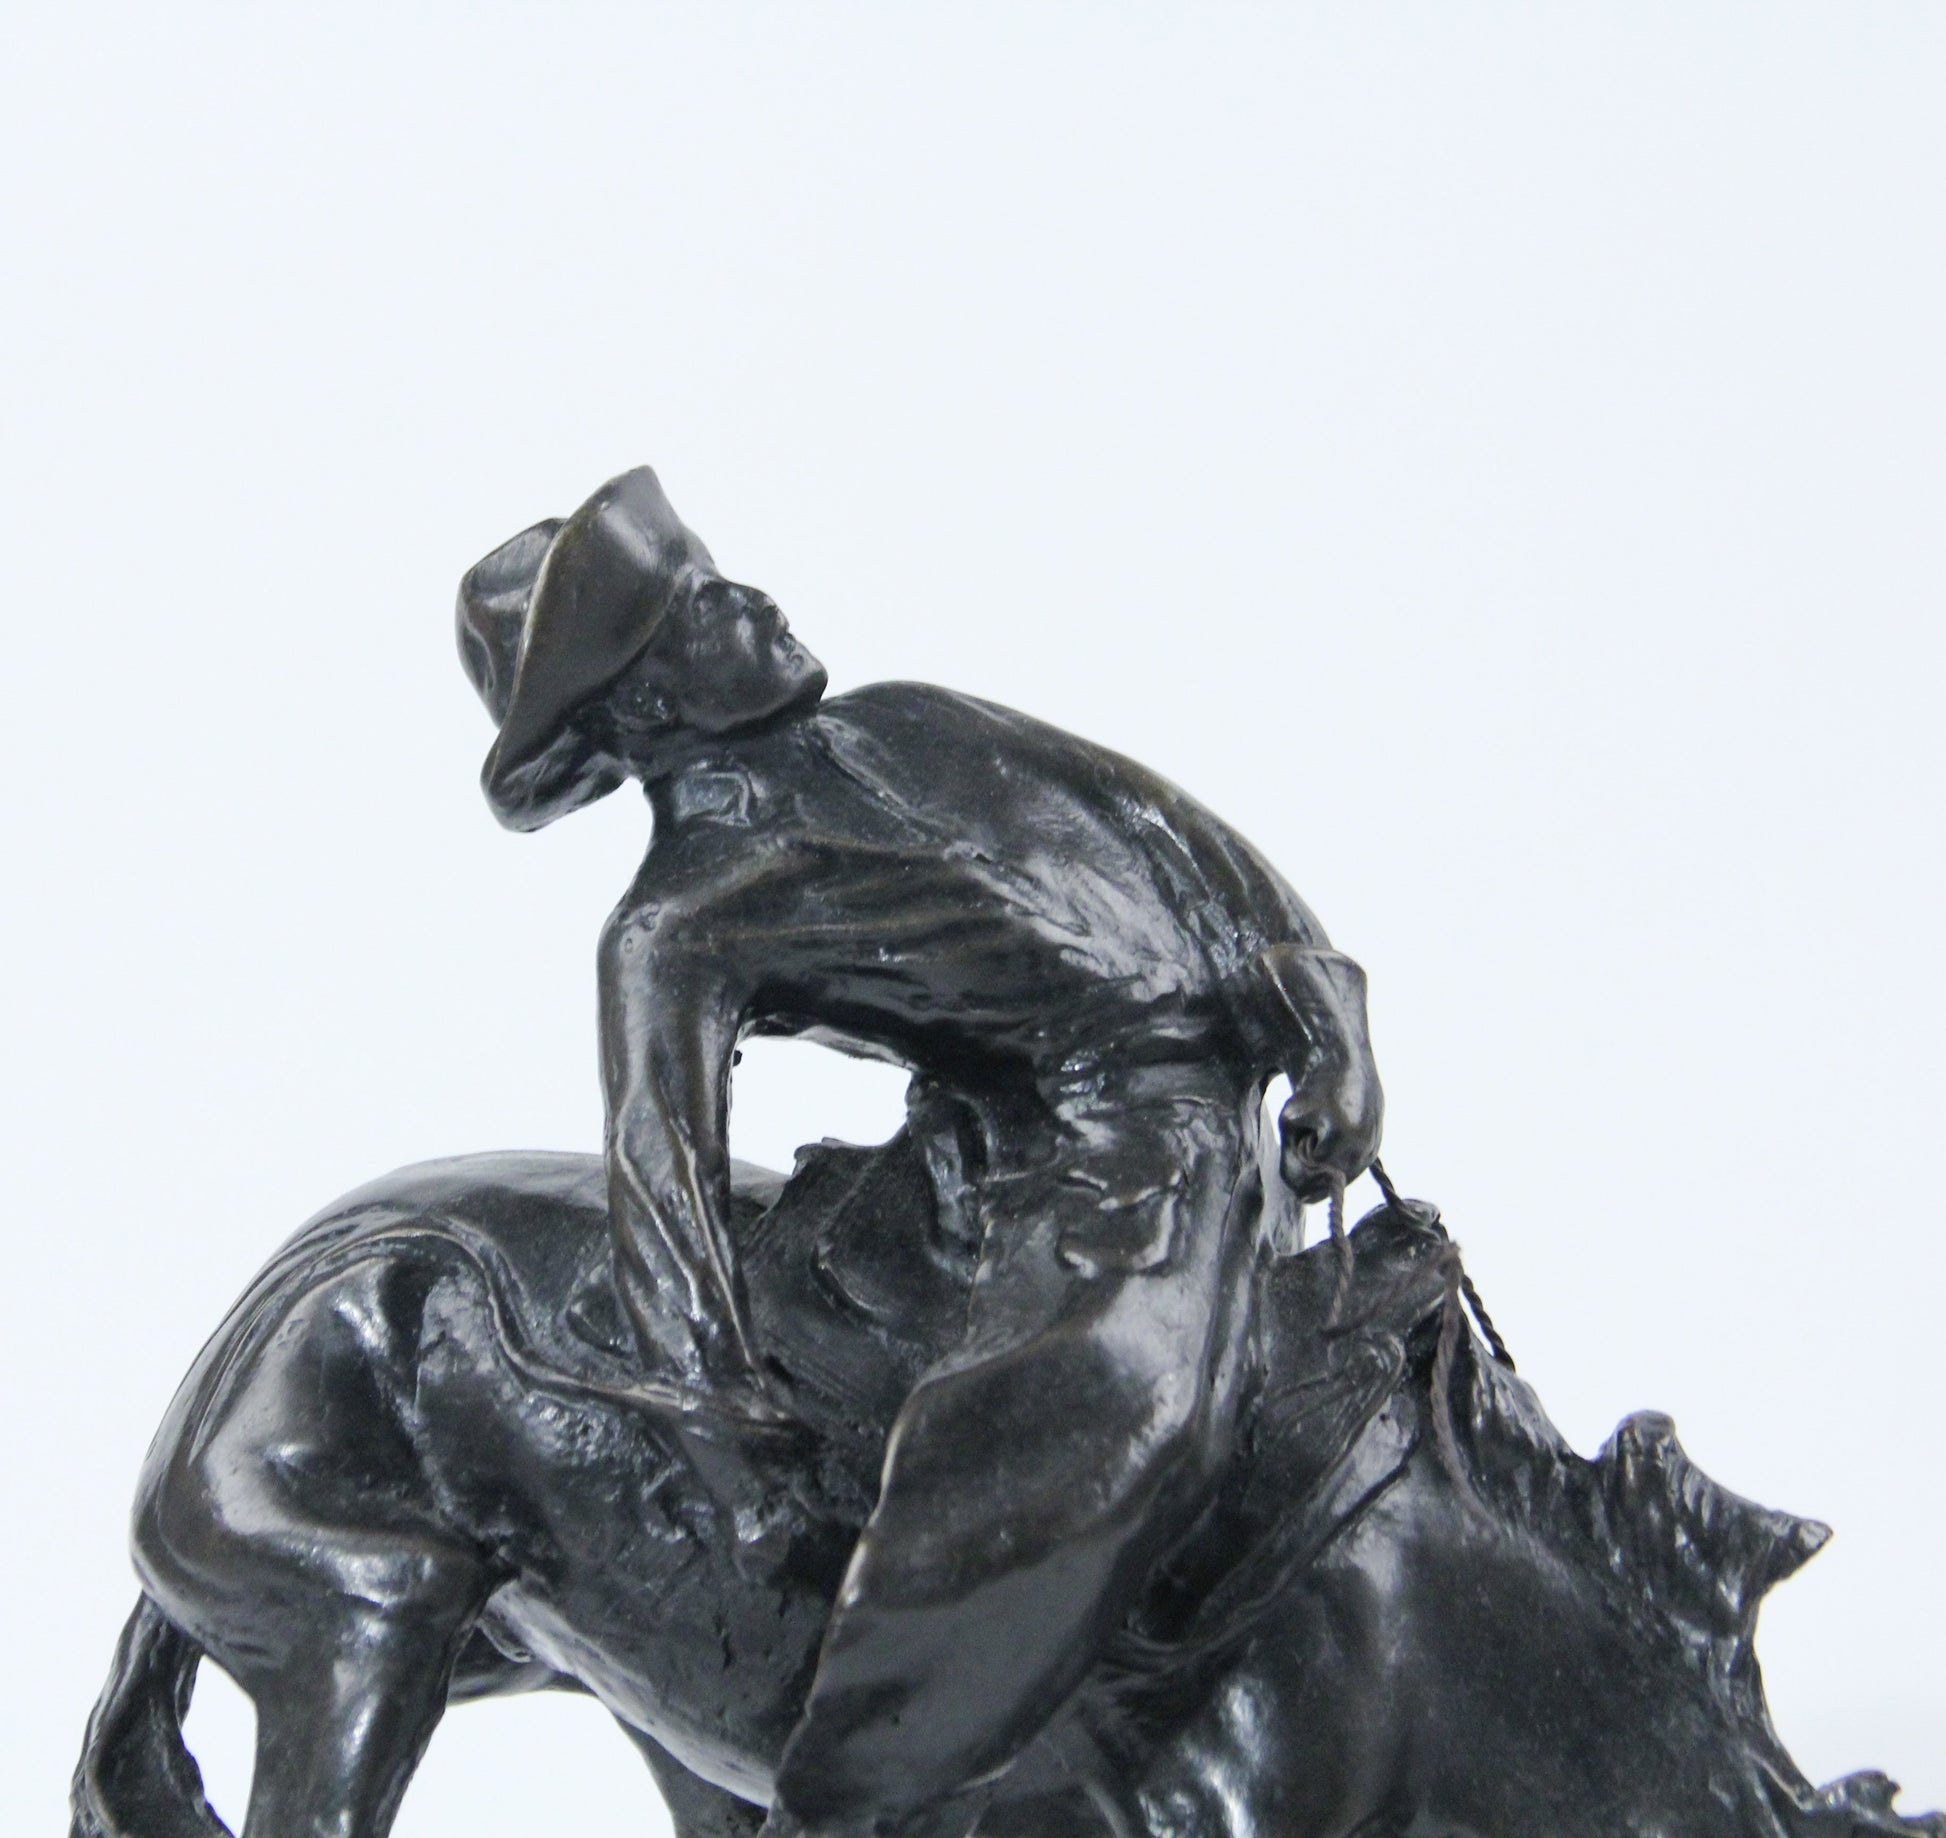 The Outlaw bronze sculpture replica statue by Frederic Remington cowboy on a bucking horse saddle breaking detail face